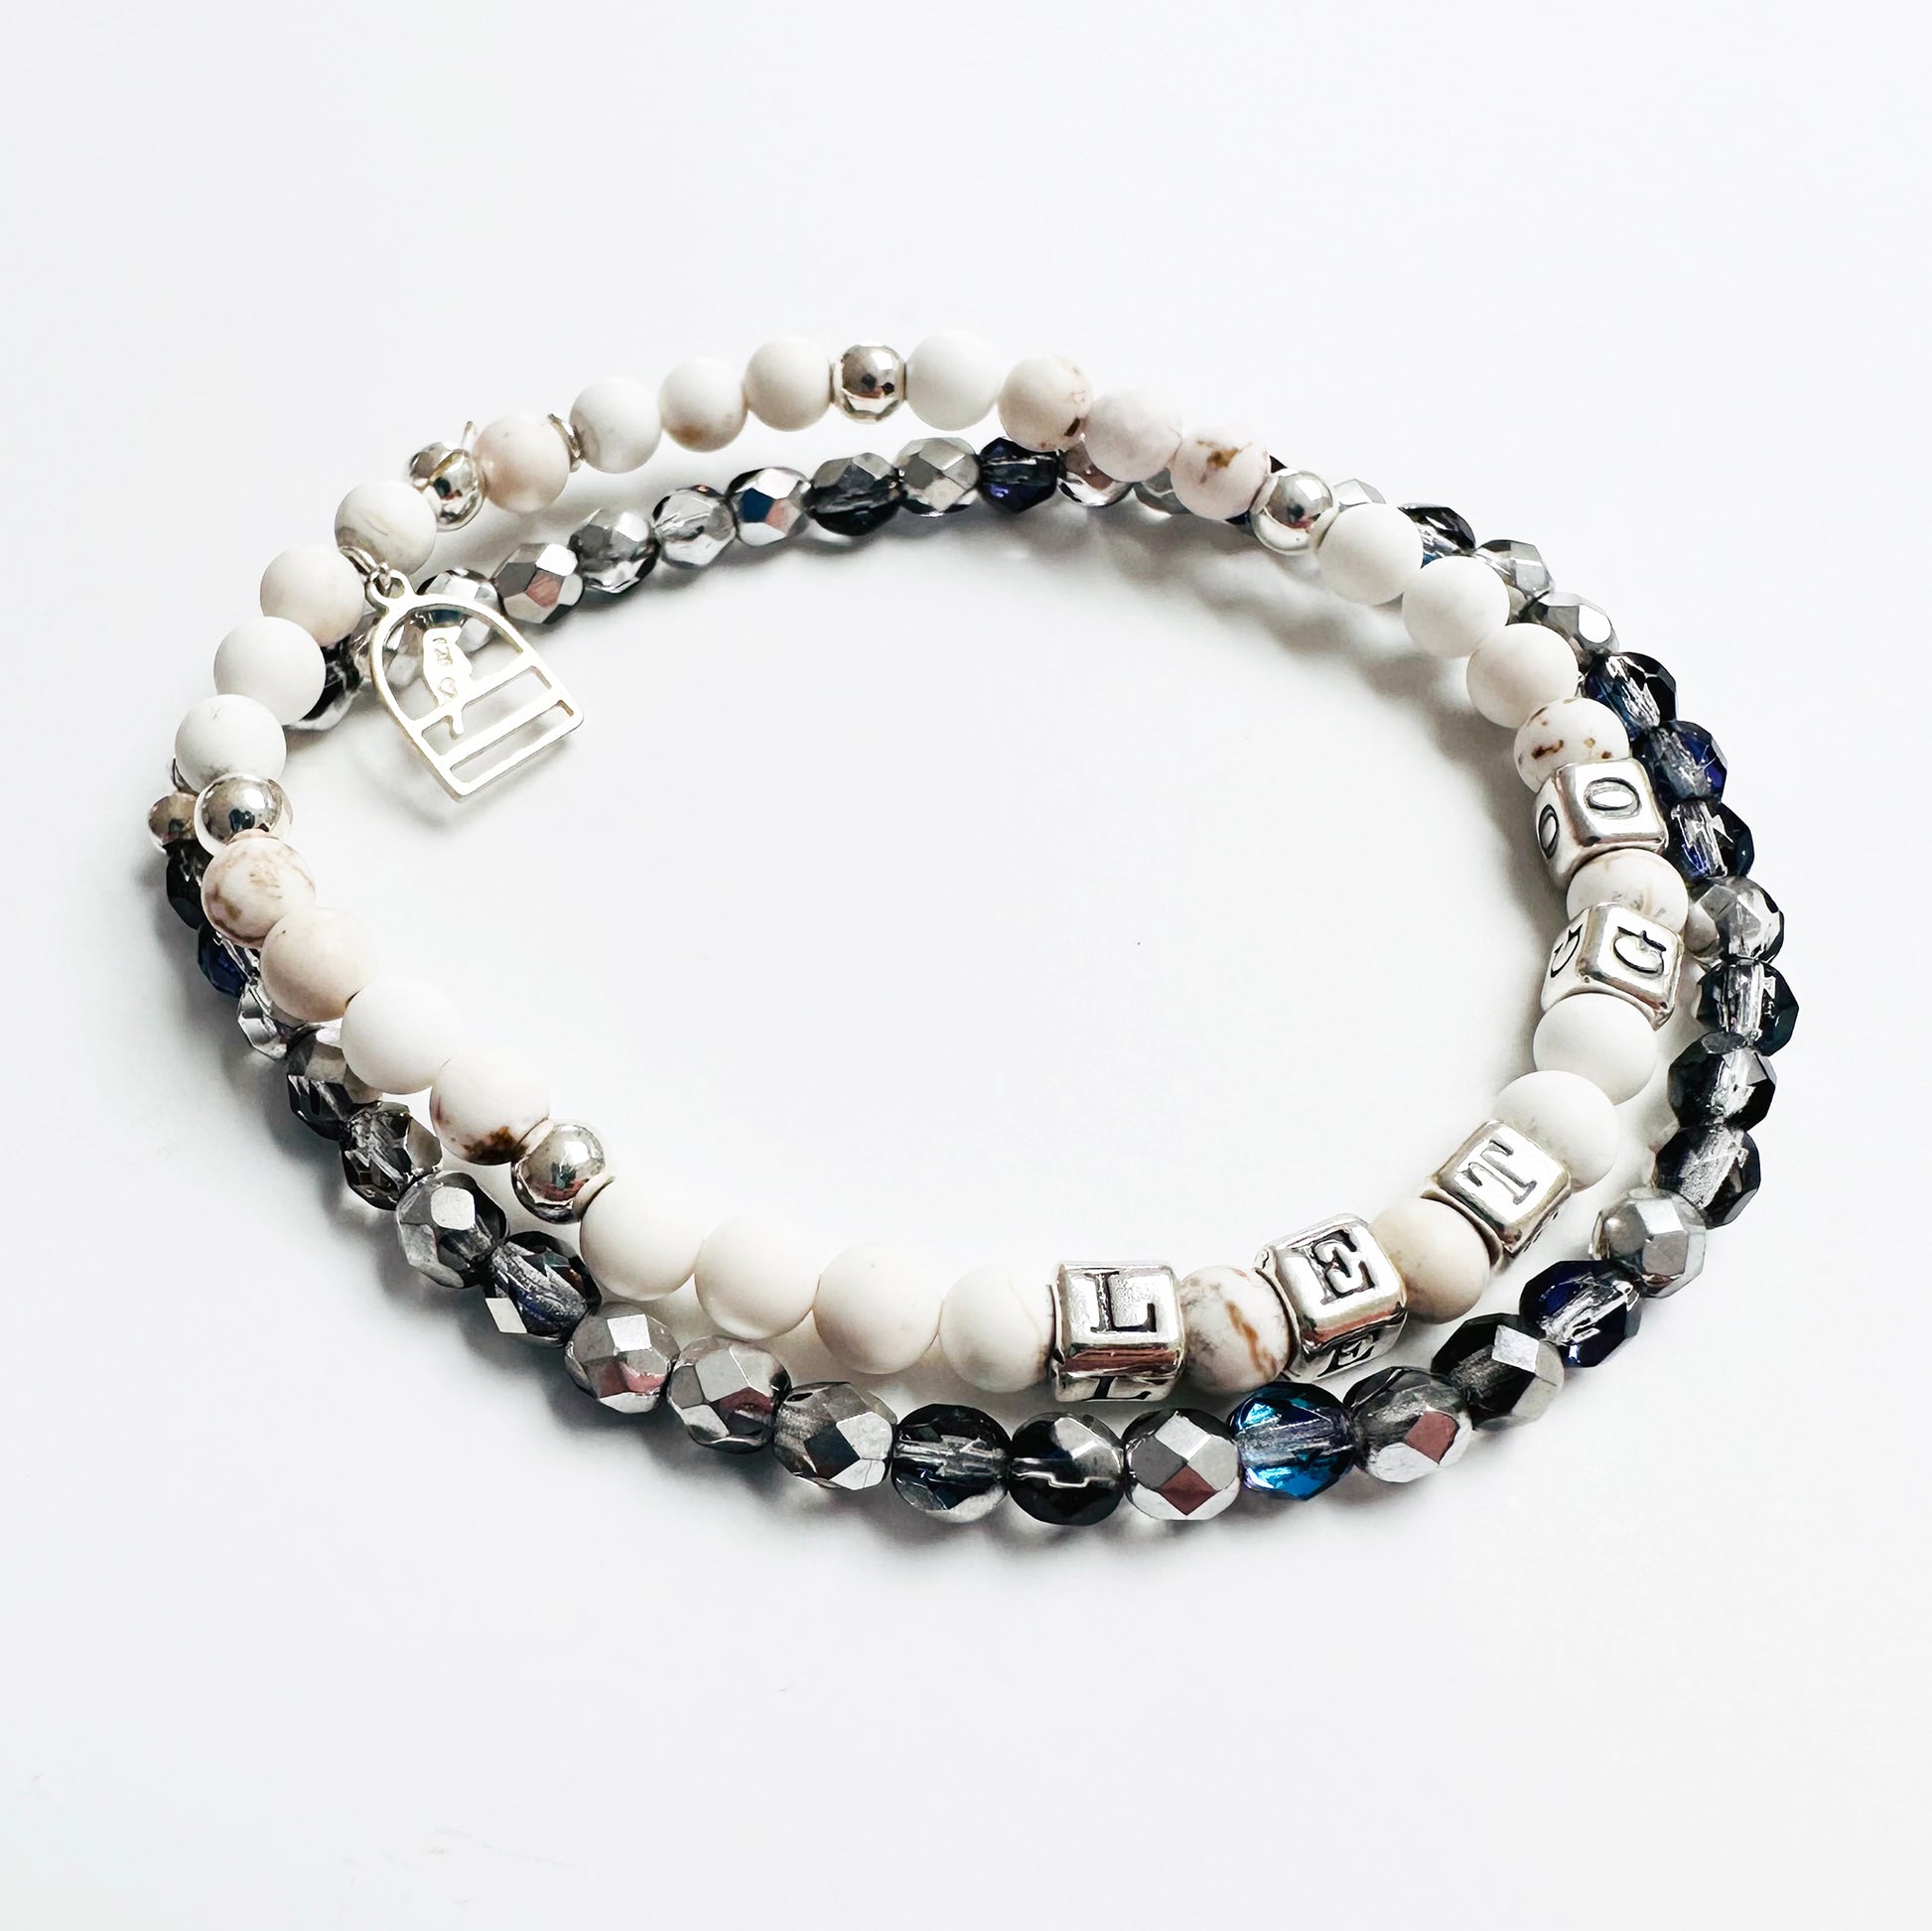 Let Go stretch bracelet in sterling silver and white howlite beads, with sterling silver bird charm and sparkly crystal stretch bracelet